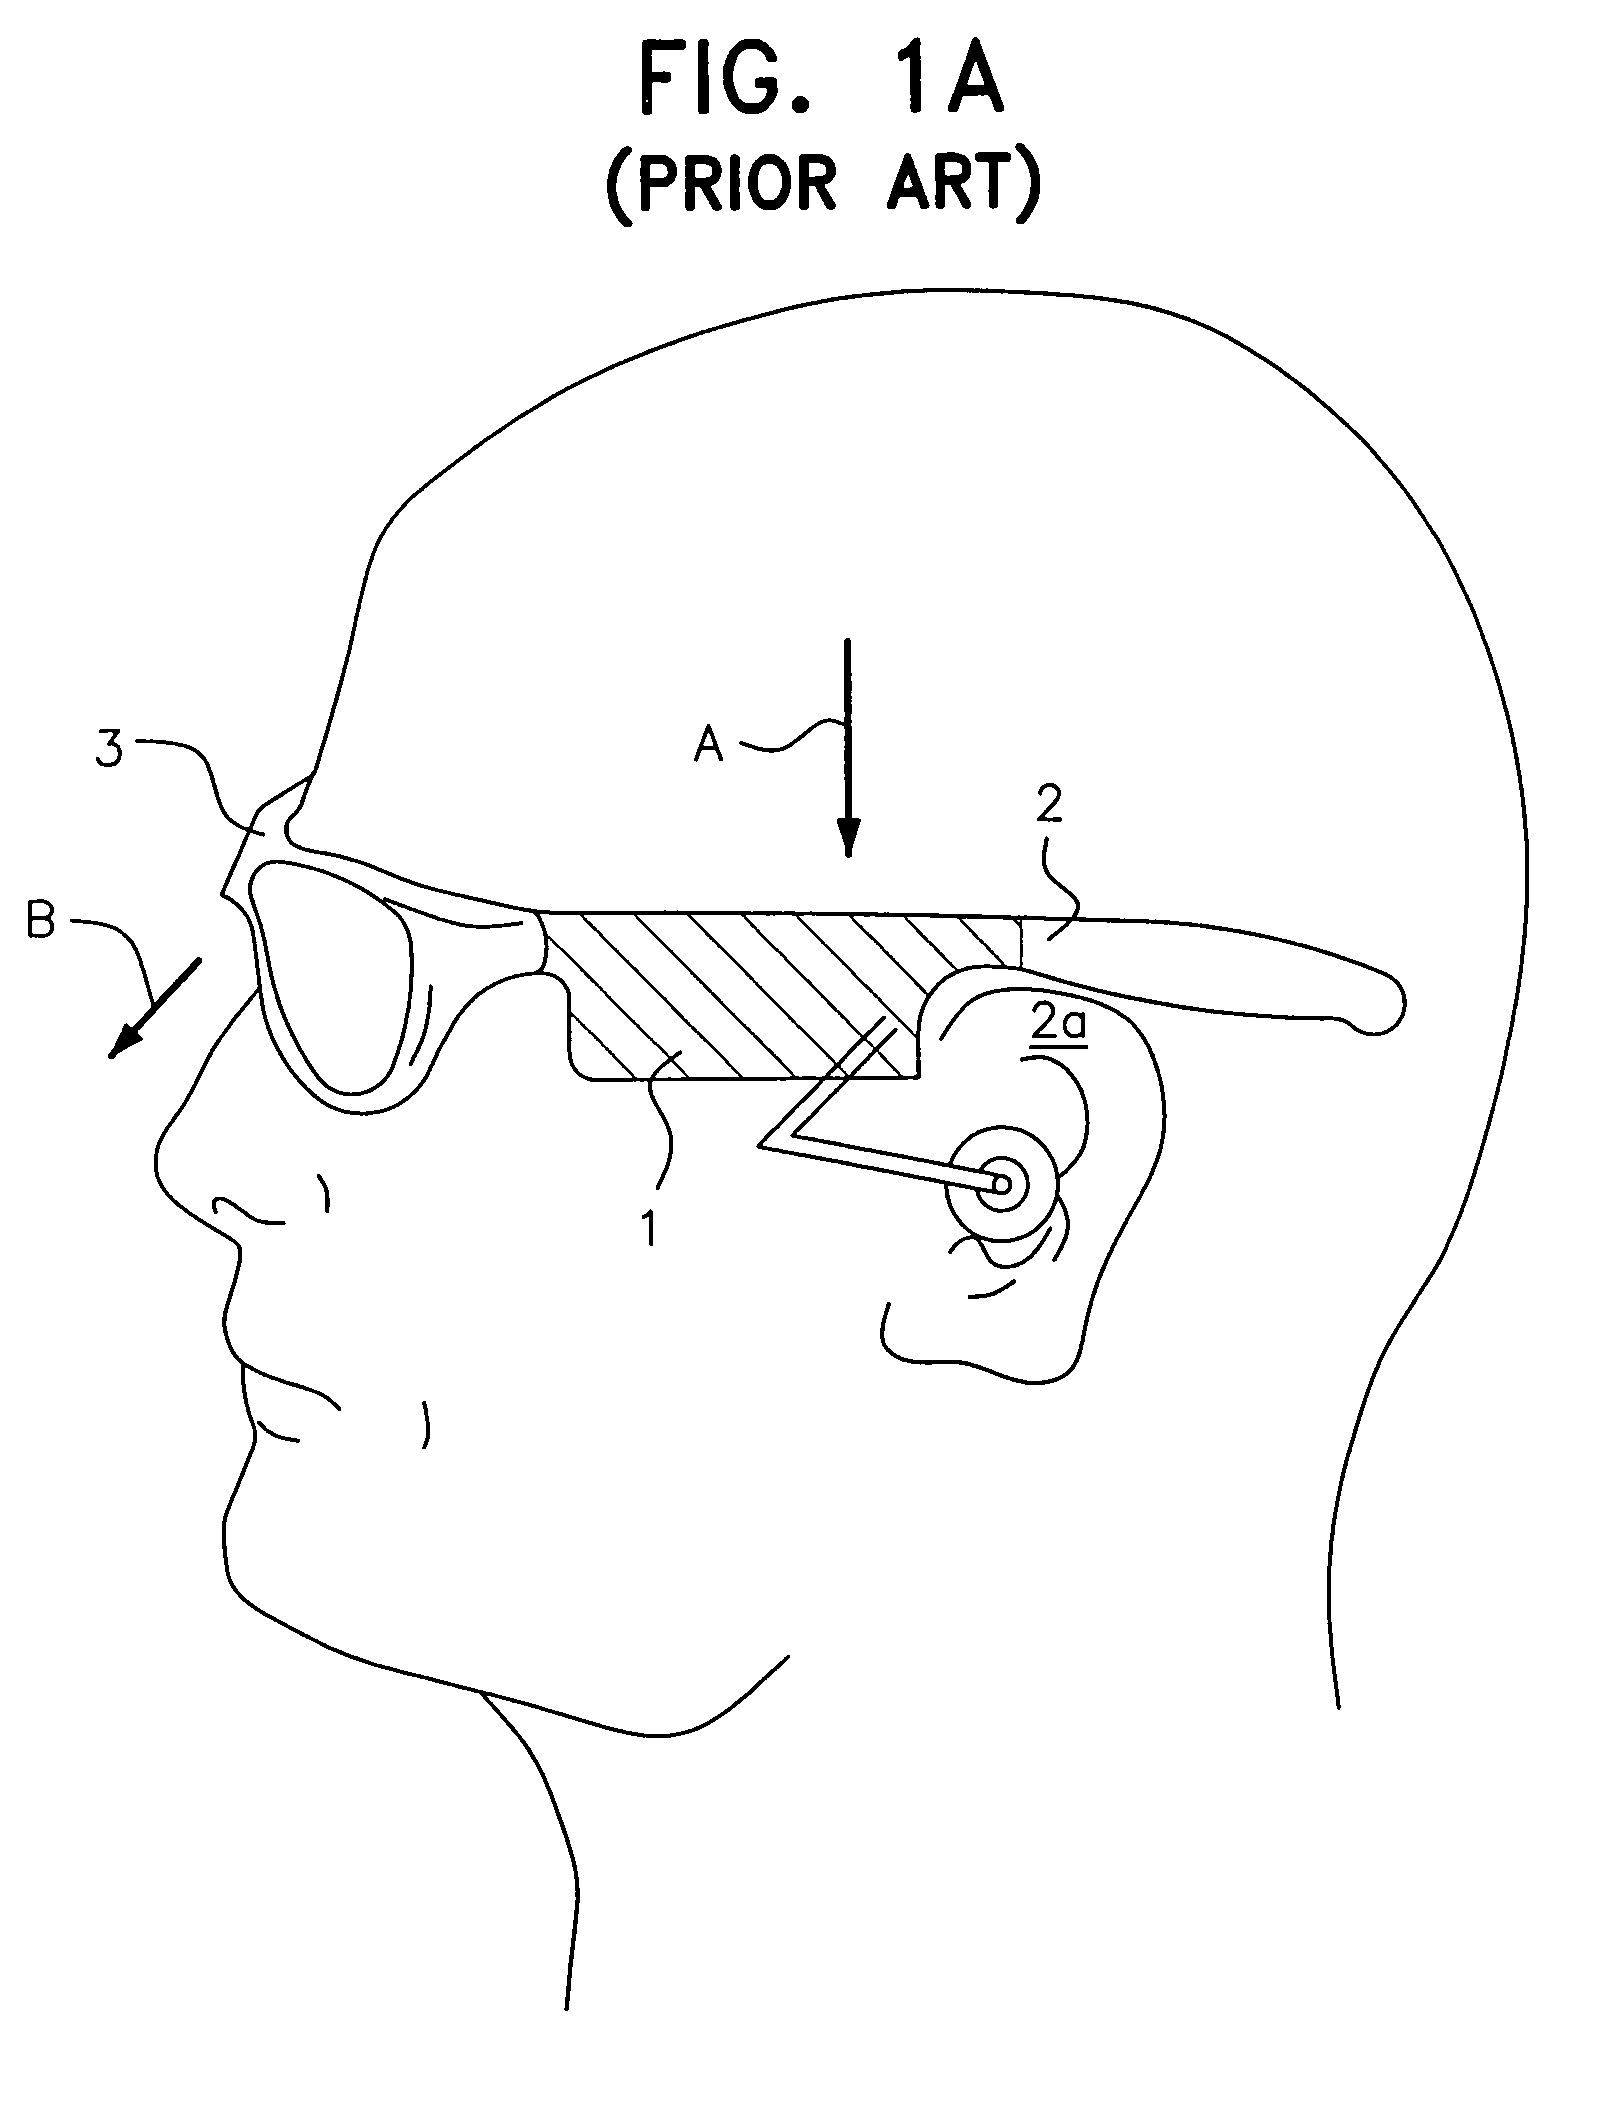 Biologically fit wearable electronics apparatus and methods